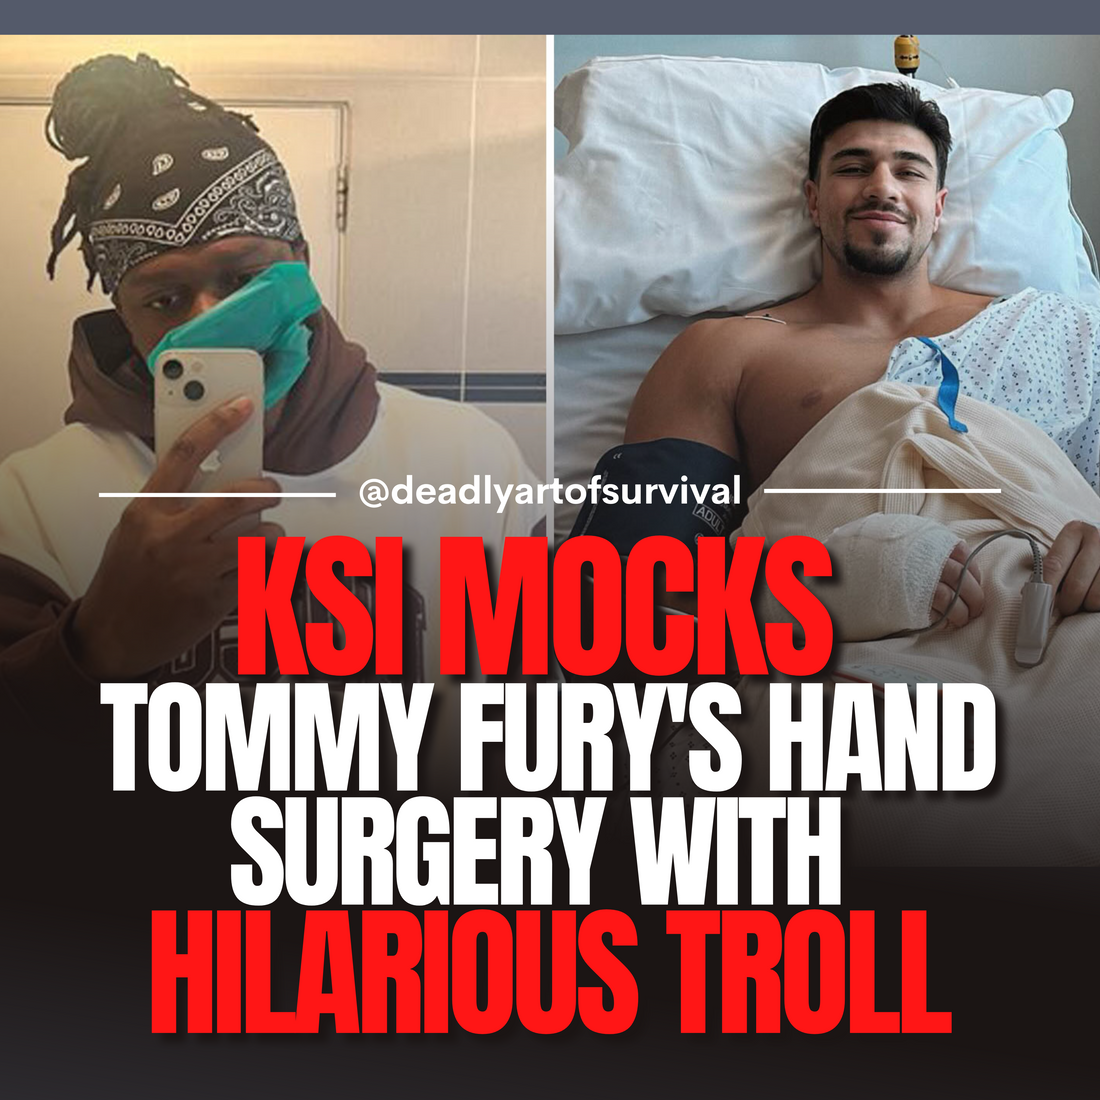 KSI-Mocks-Tommy-Fury-Hilarious-Troll-Over-Hand-Surgery-and-Injury-Statement deadlyartofsurvival.com